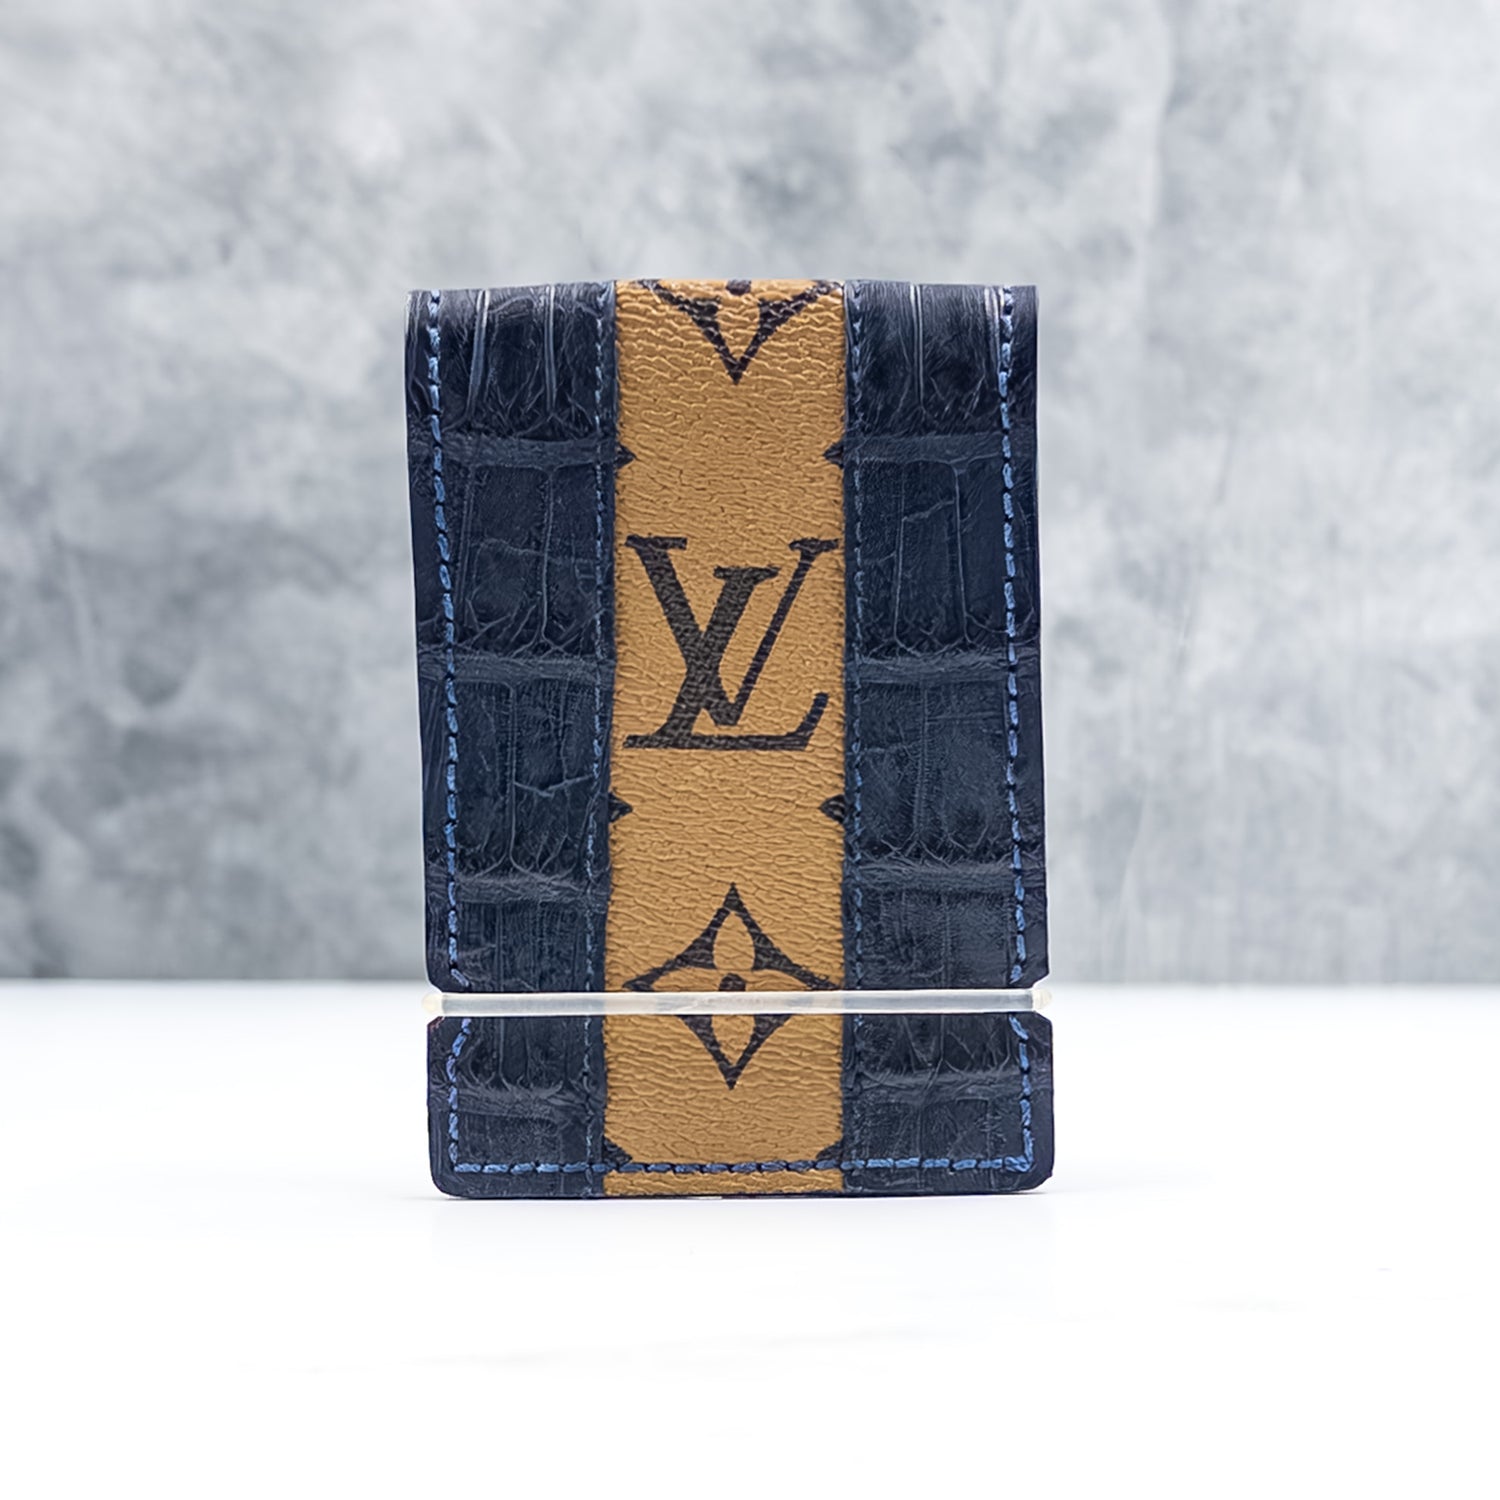 From Paris With Love Cash Cover: Tan Monogram And Navy Gator